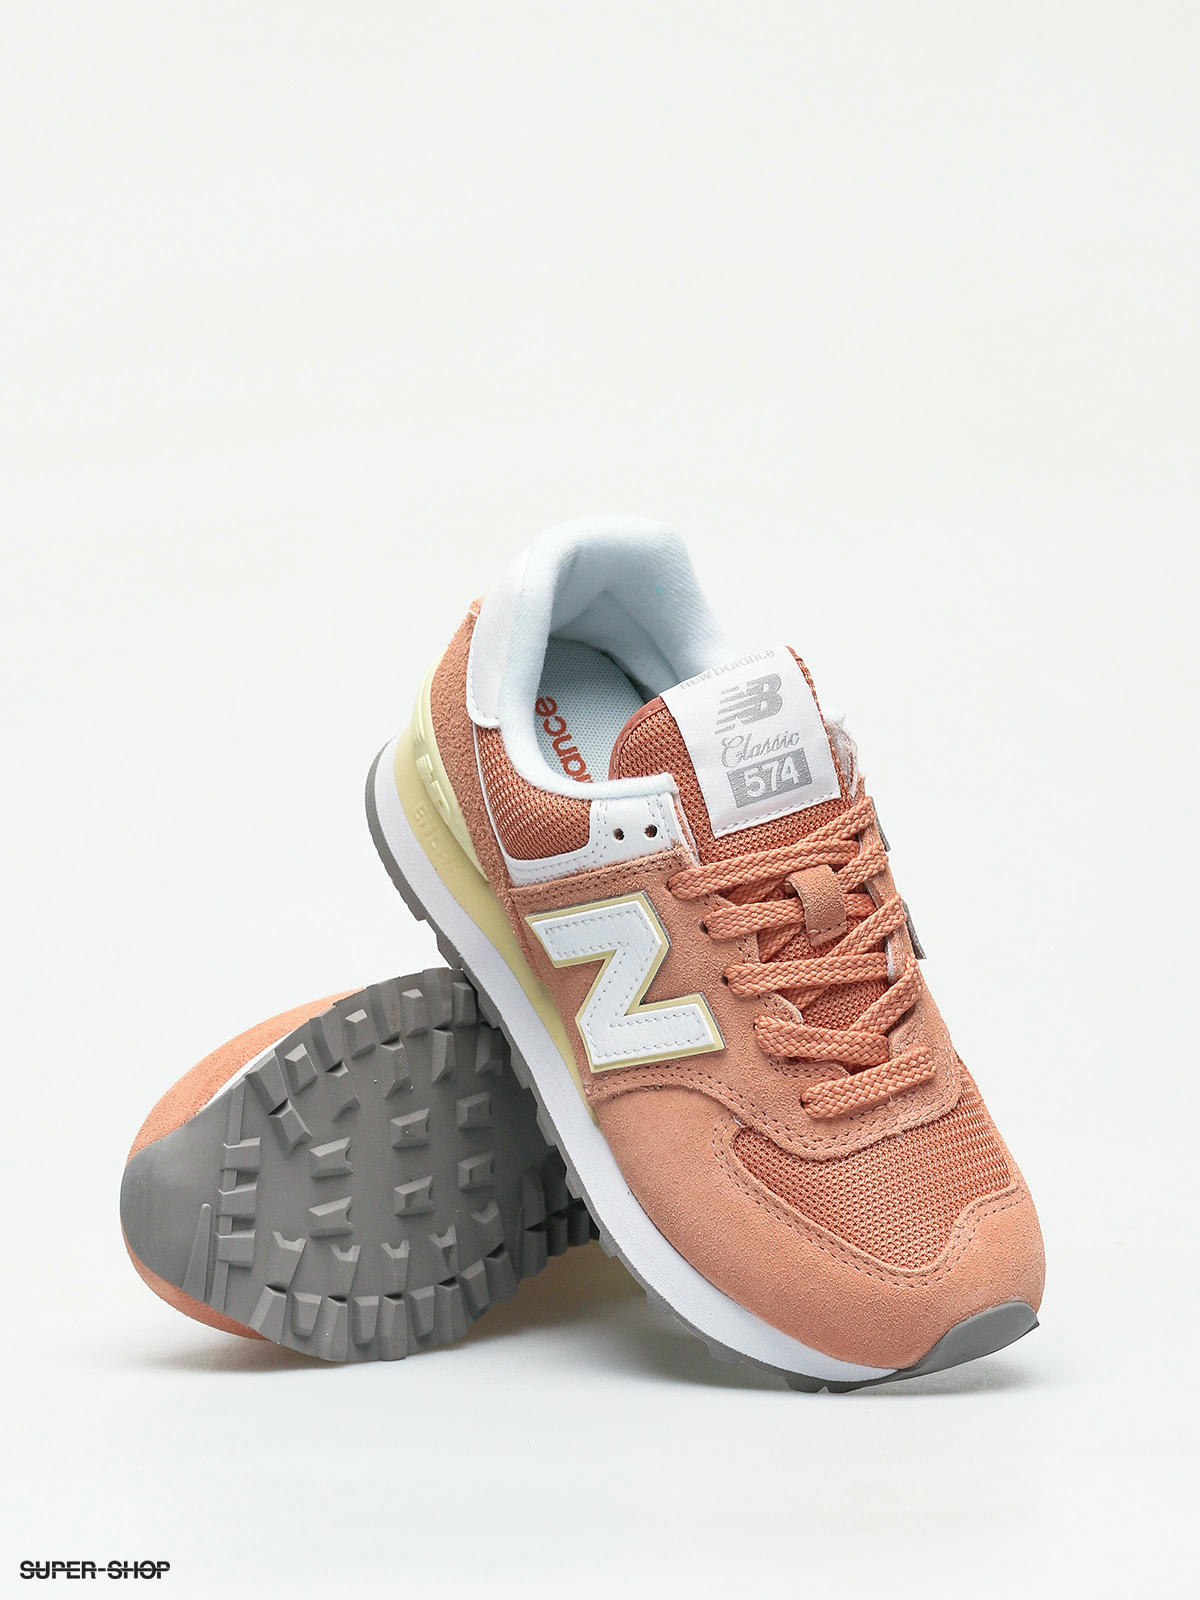 New Balance 574 Copper Online Shop, UP TO 61% OFF